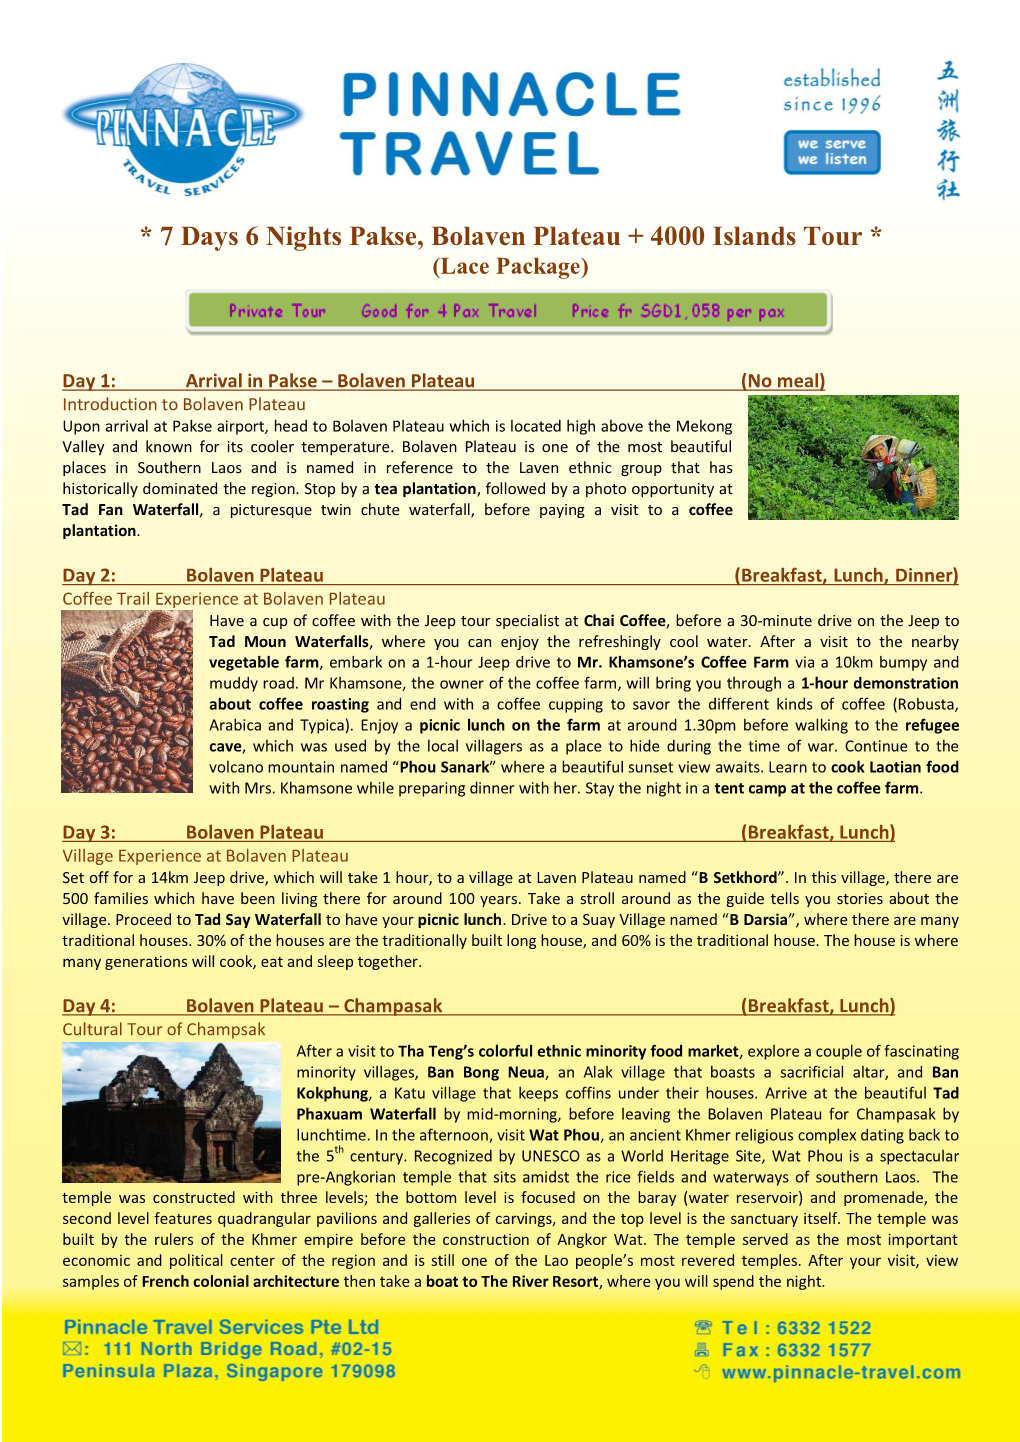 7 Days 6 Nights Pakse, Bolaven Plateau + 4000 Islands Tour * (Lace Package)